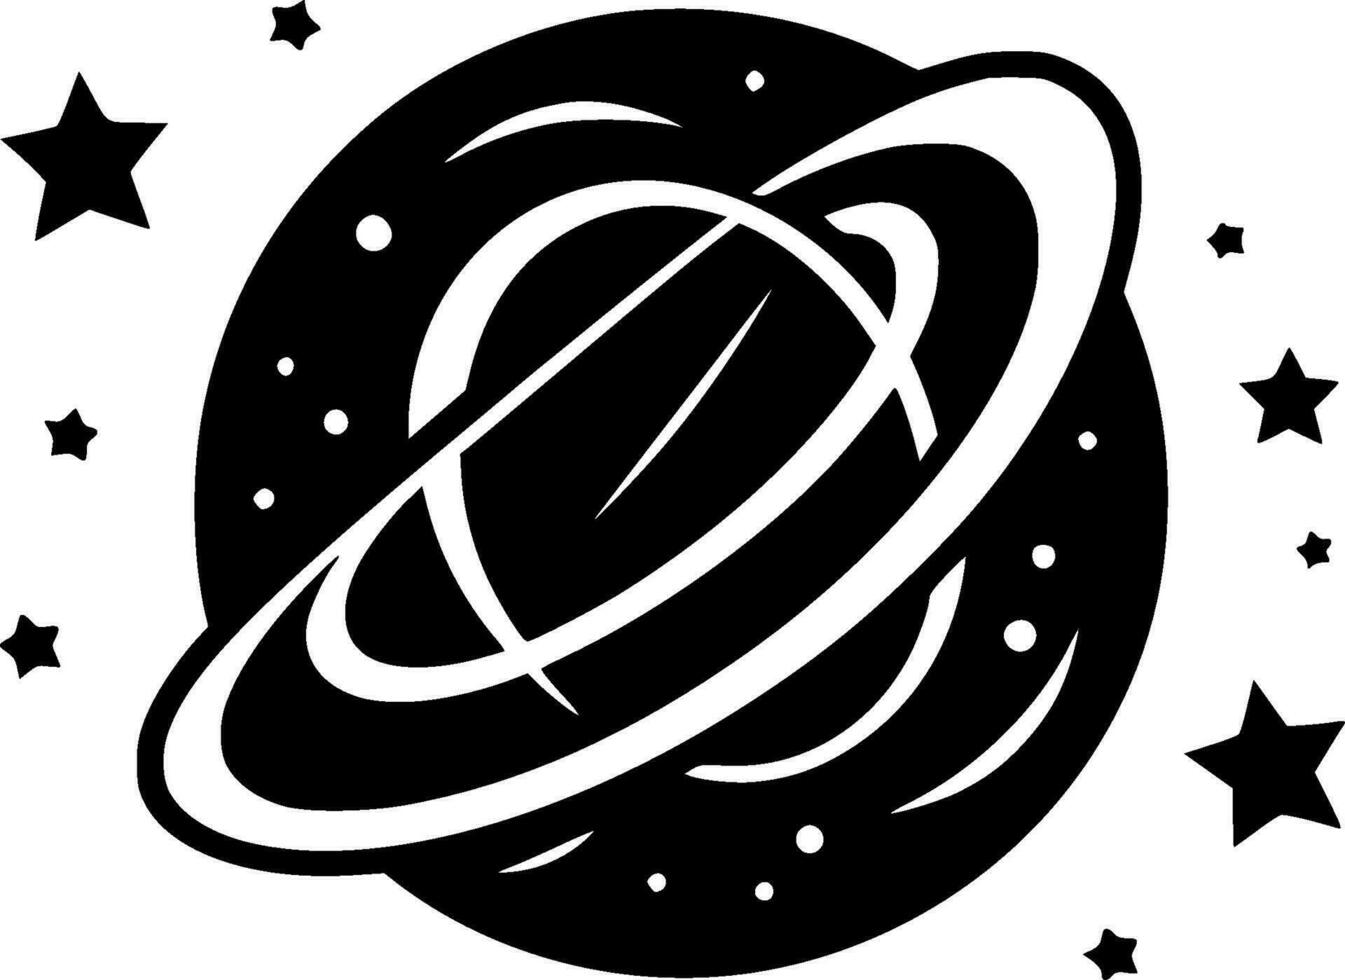 Galaxy - High Quality Vector Logo - Vector illustration ideal for T-shirt graphic